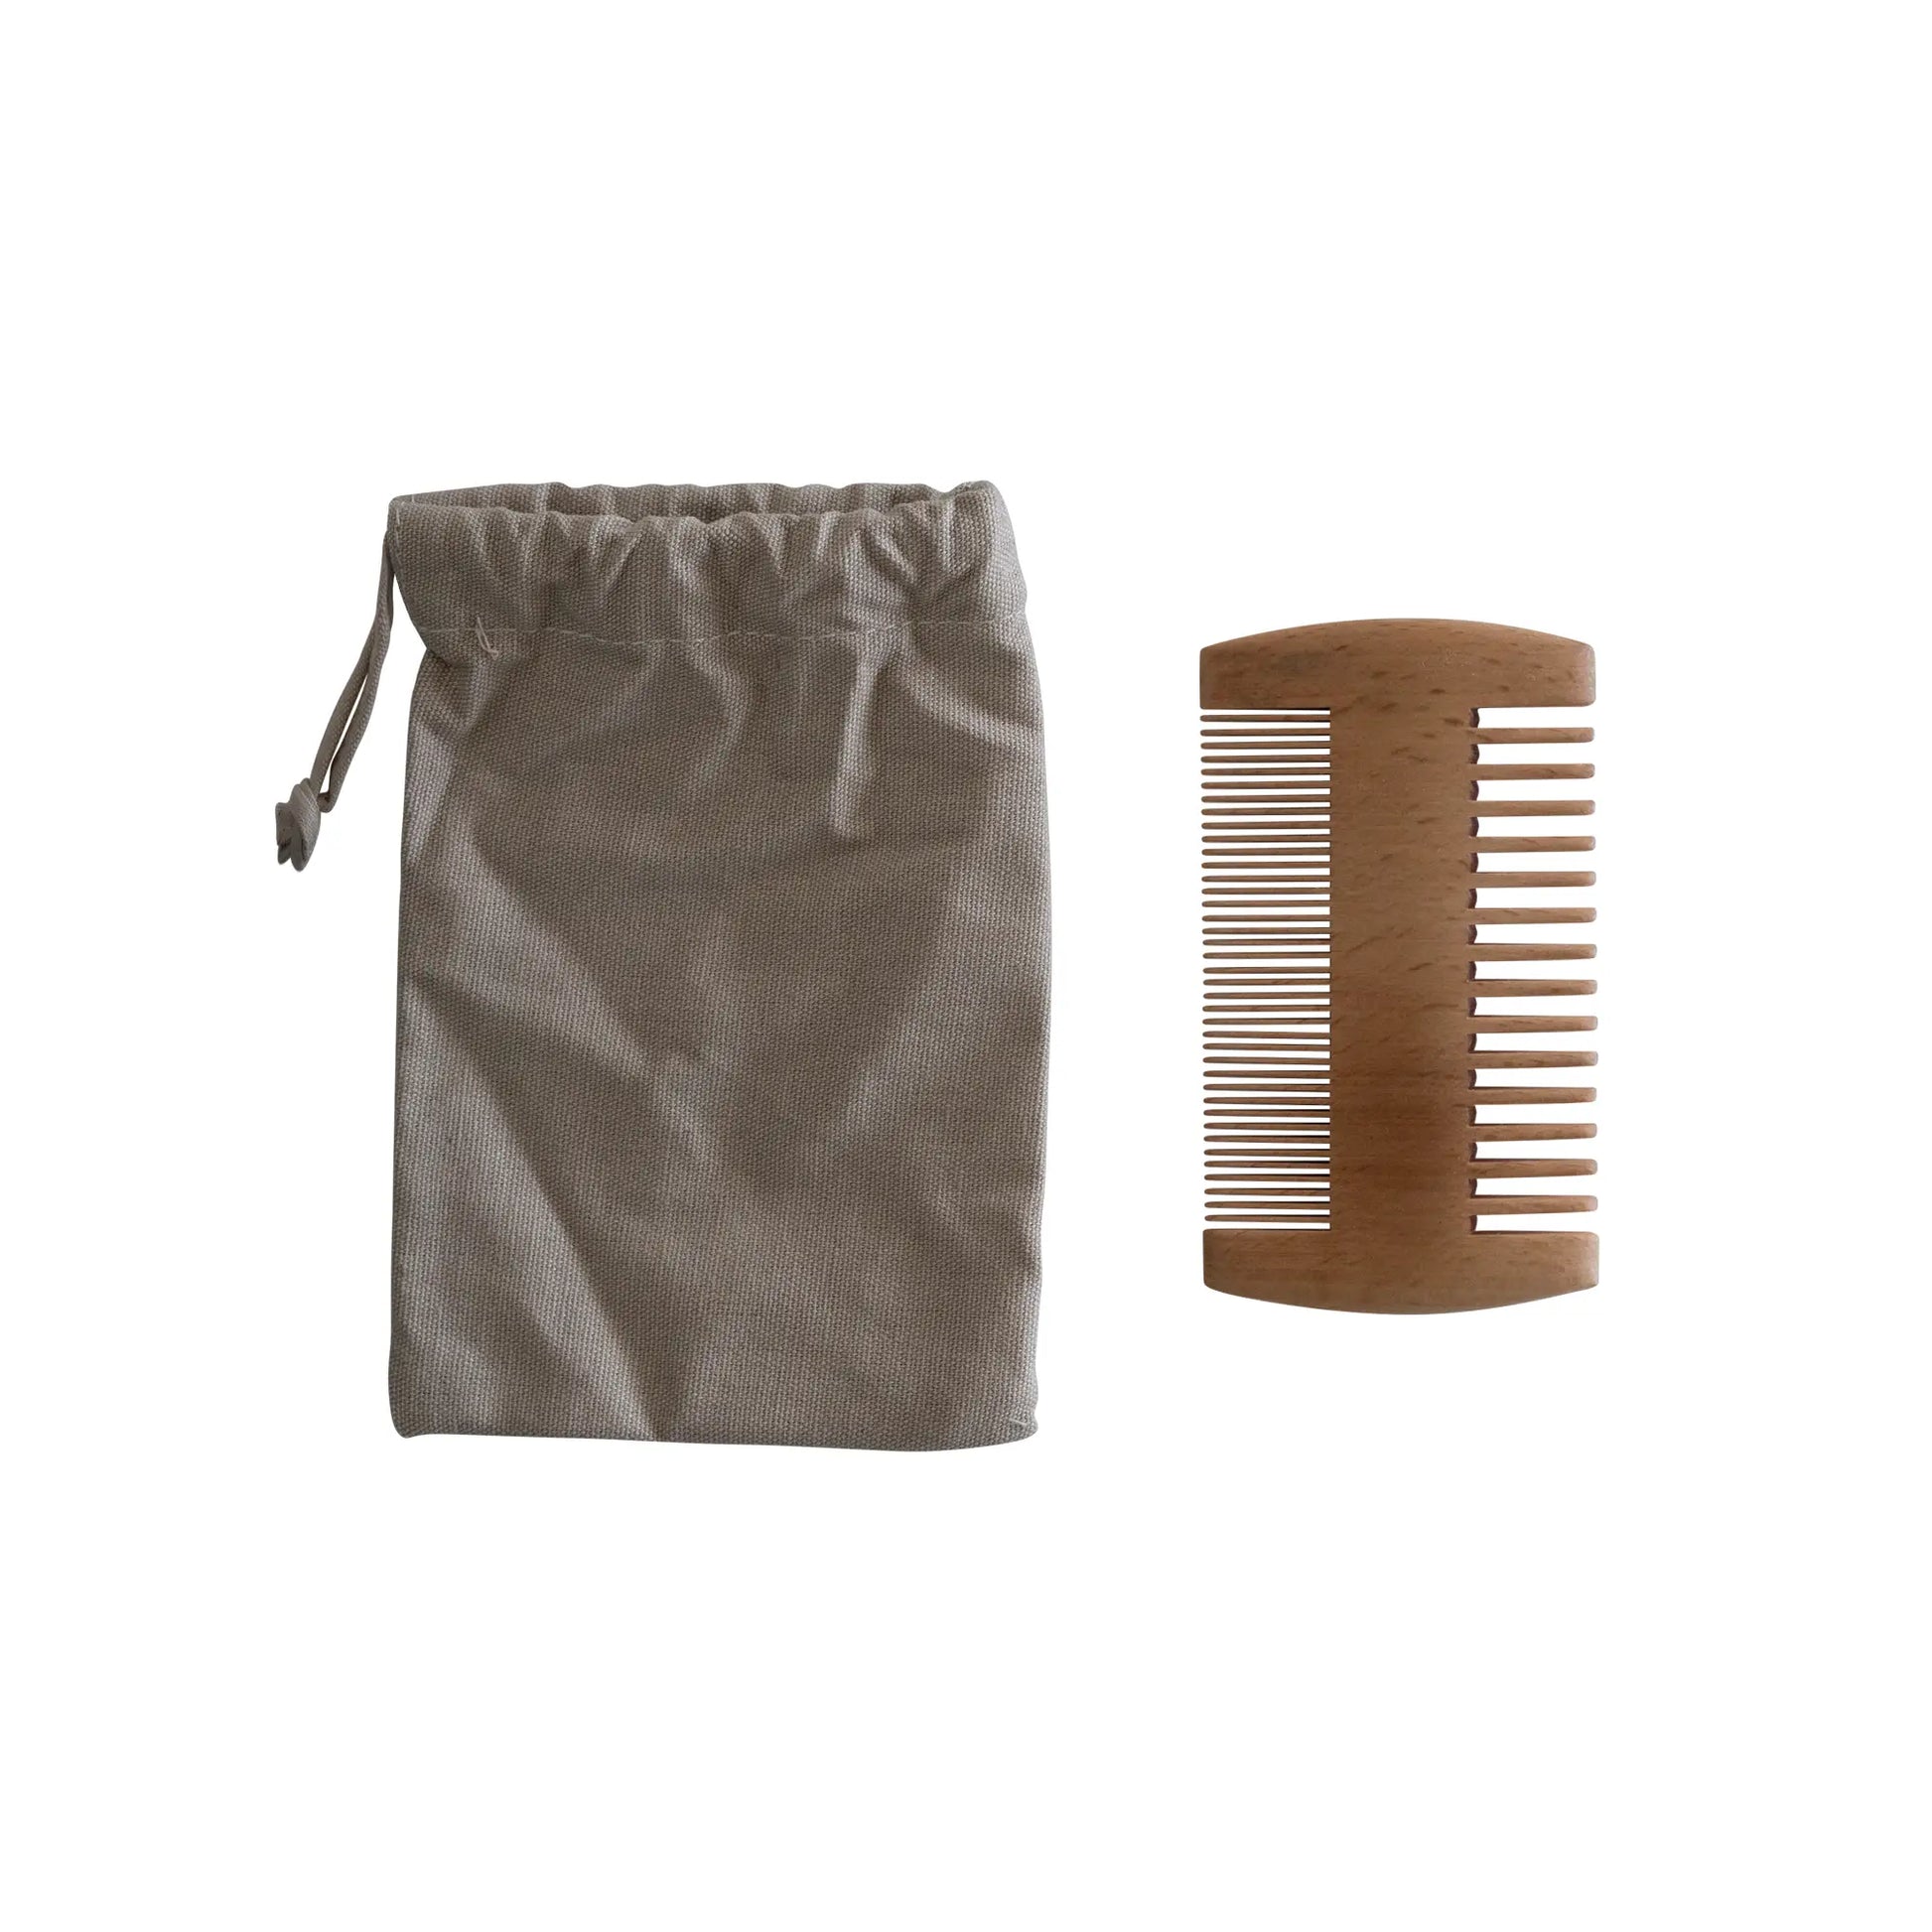 A bag for a bambo comb and  beard comb